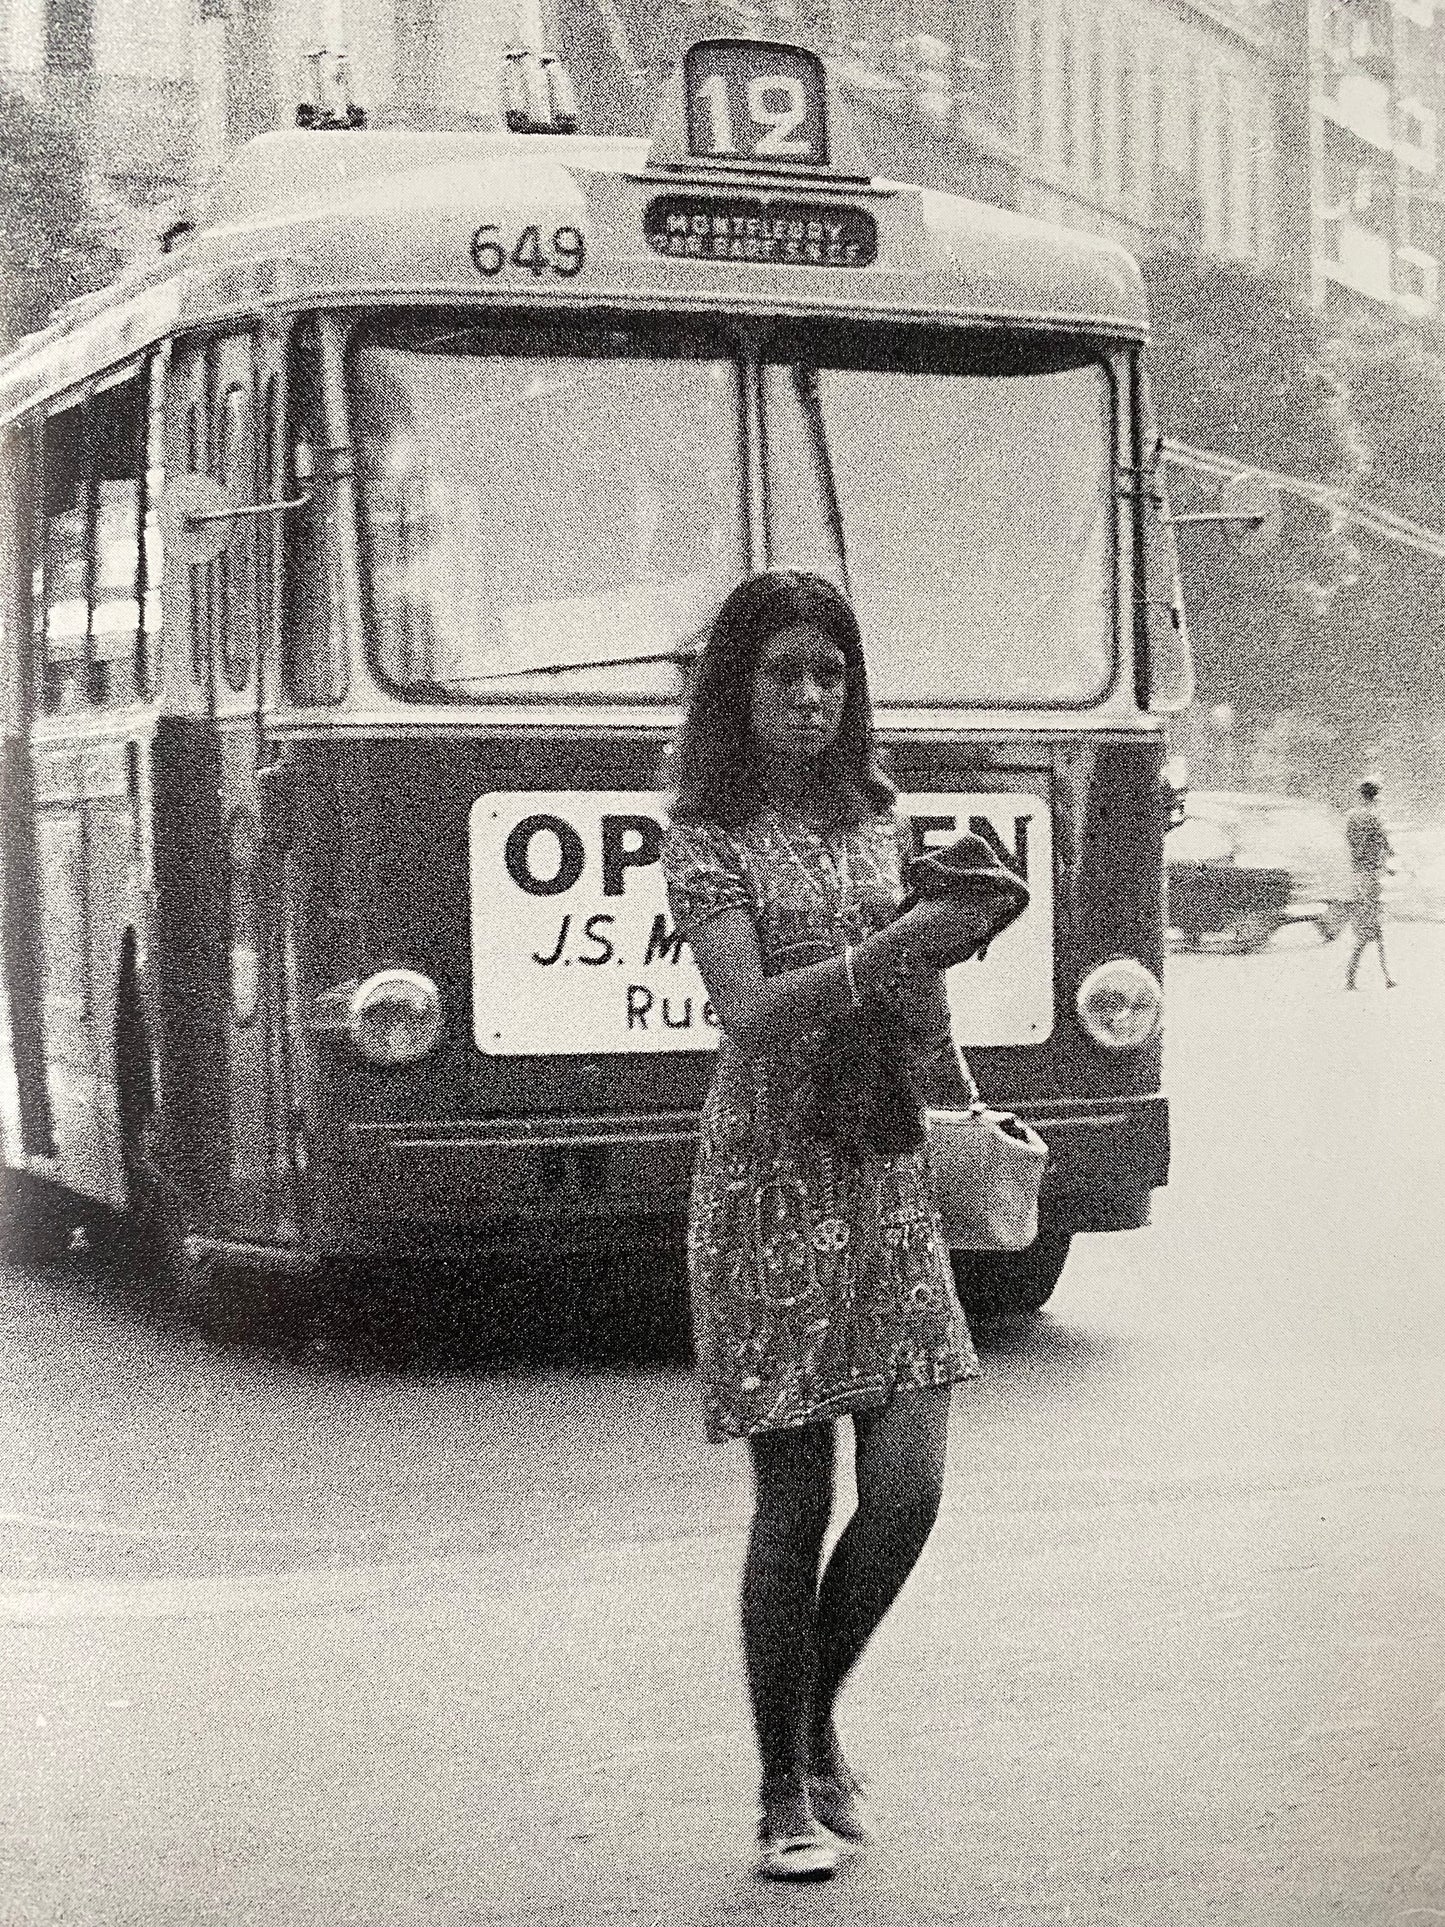 Robert E. Jowitt -  The Girl in the Street: Or the Bedside Bus Book (1991)